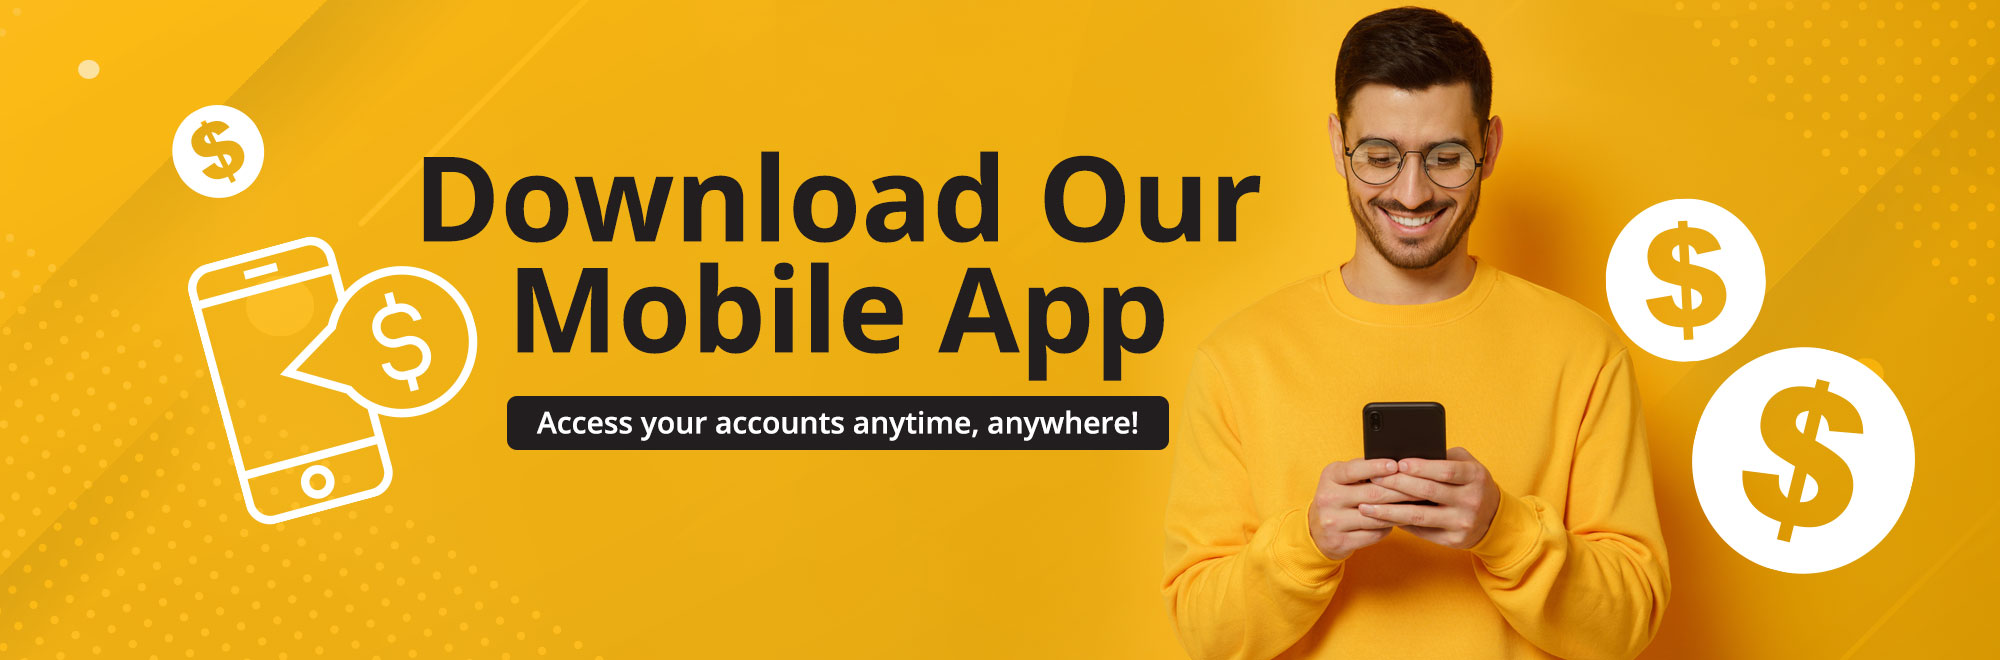 Download our mobile app to access your accounts anytime, anywhere!